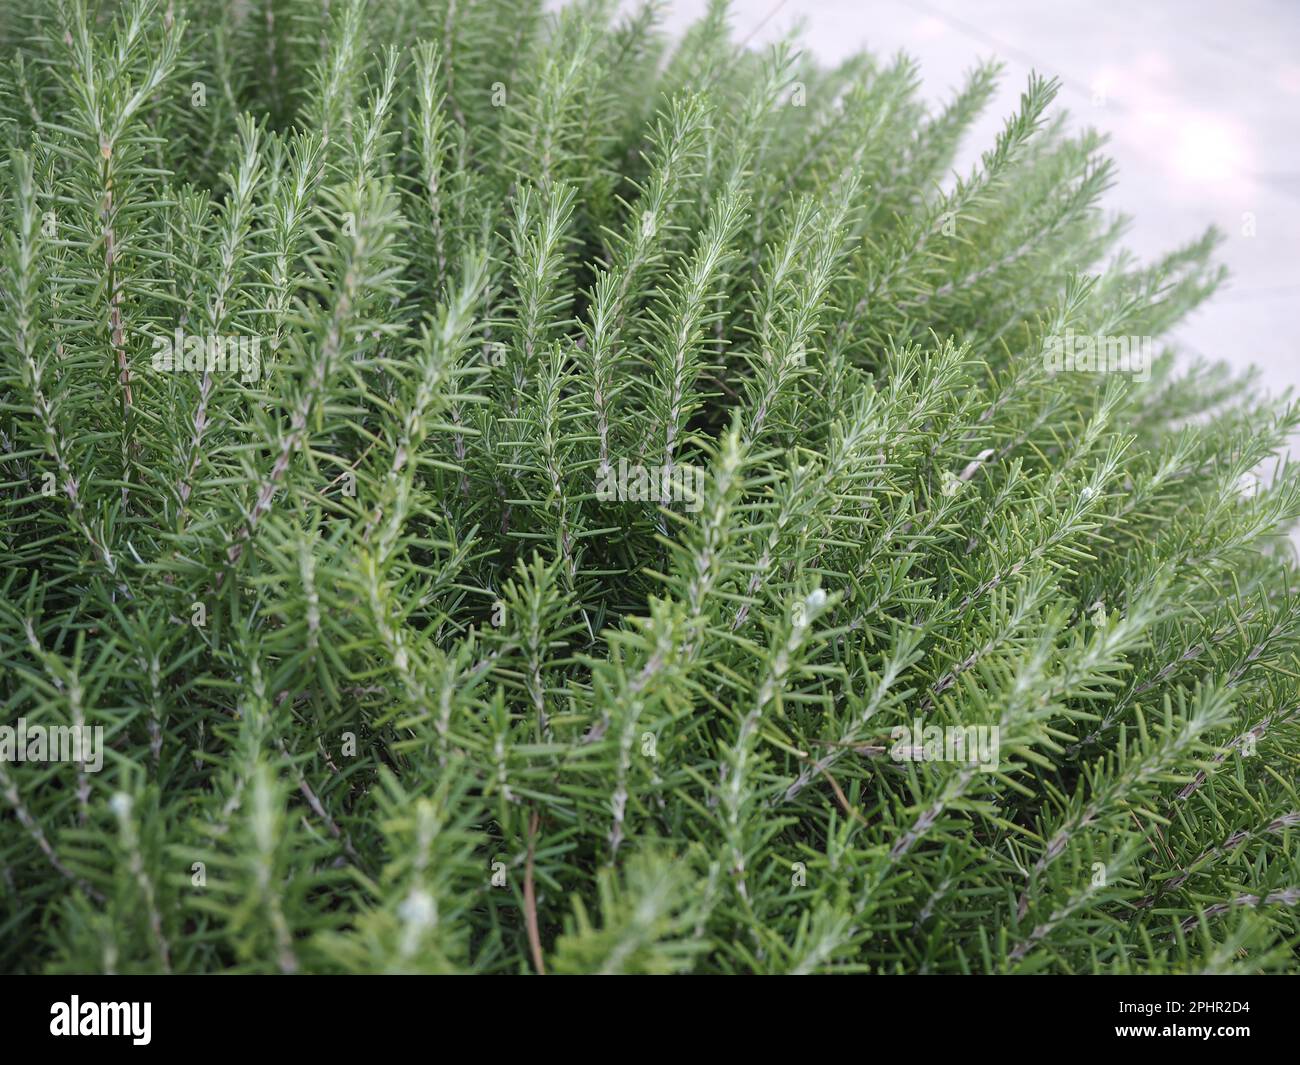 Rosemary (Salvia rosmarinus or Rosmarinus officinalis). This plant is an aromatic evergreen shrub with leaves similar to needles. The leaves are used Stock Photo